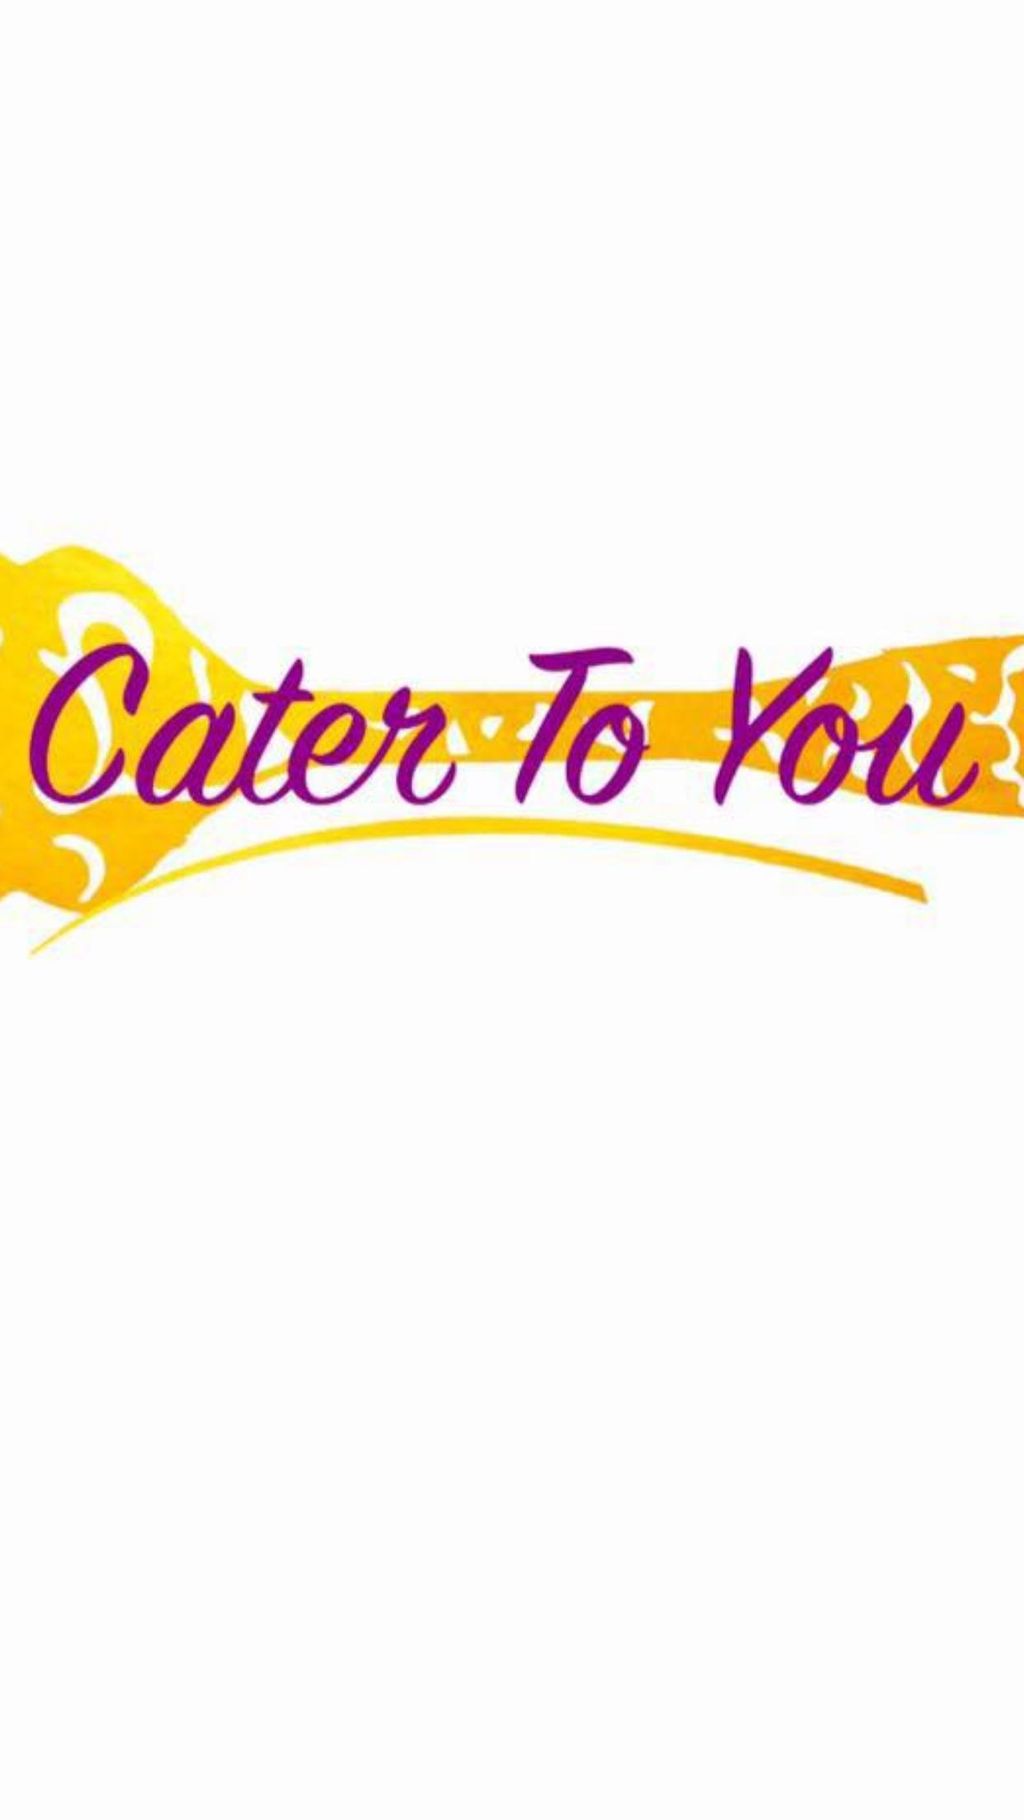 Cater To You Catering